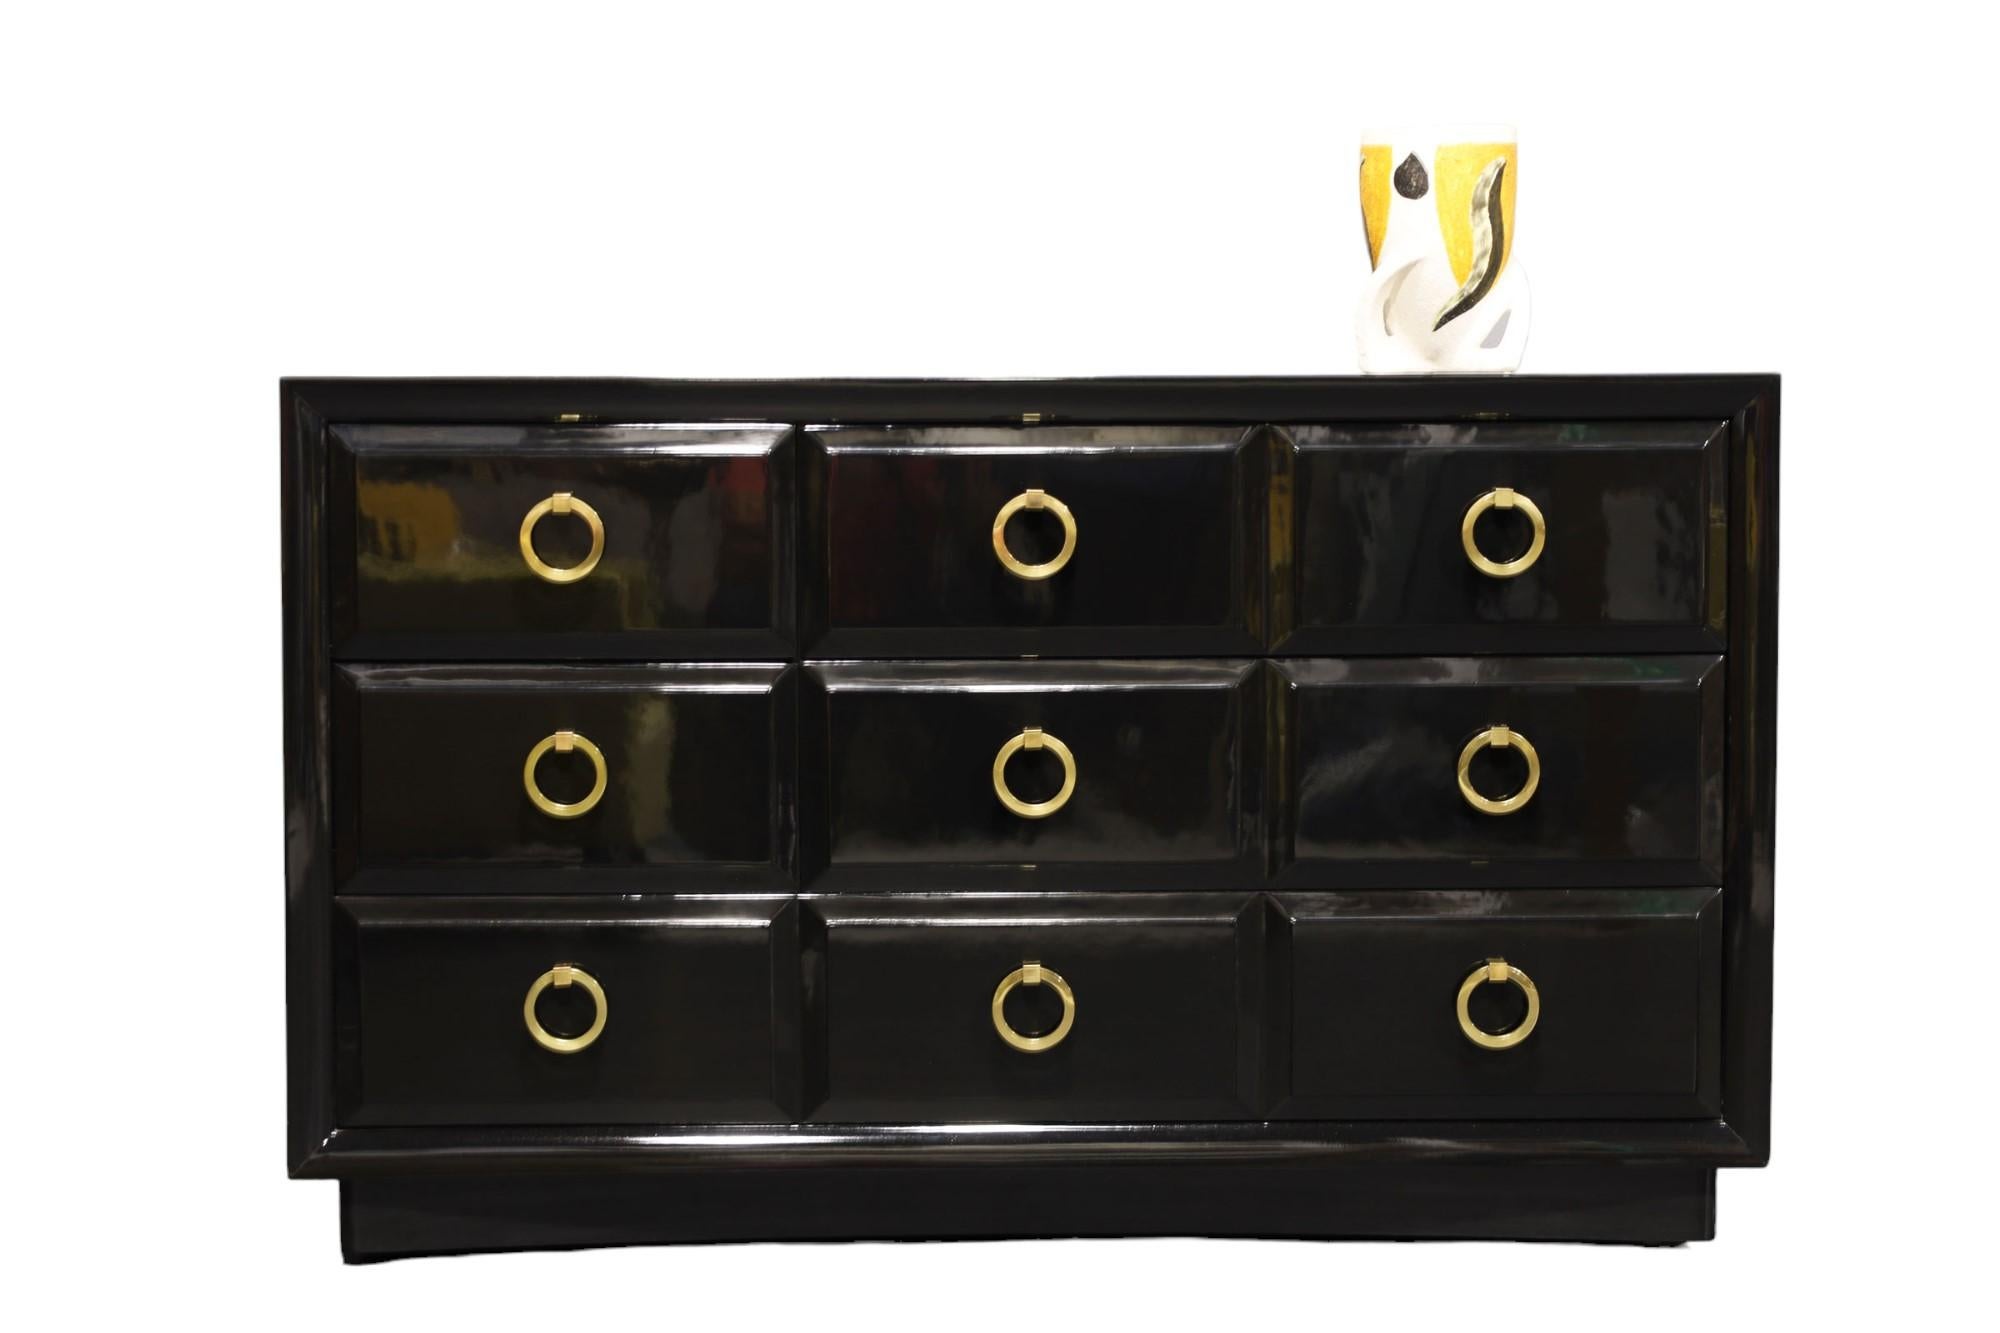 A pair of beautifully restored cabinet by Robsjohn-Gibbings for Widdicomb. This is a classic and quite substantial. We have expertly black lacquered. Pulls are solid brass and have been polished and sealed.  